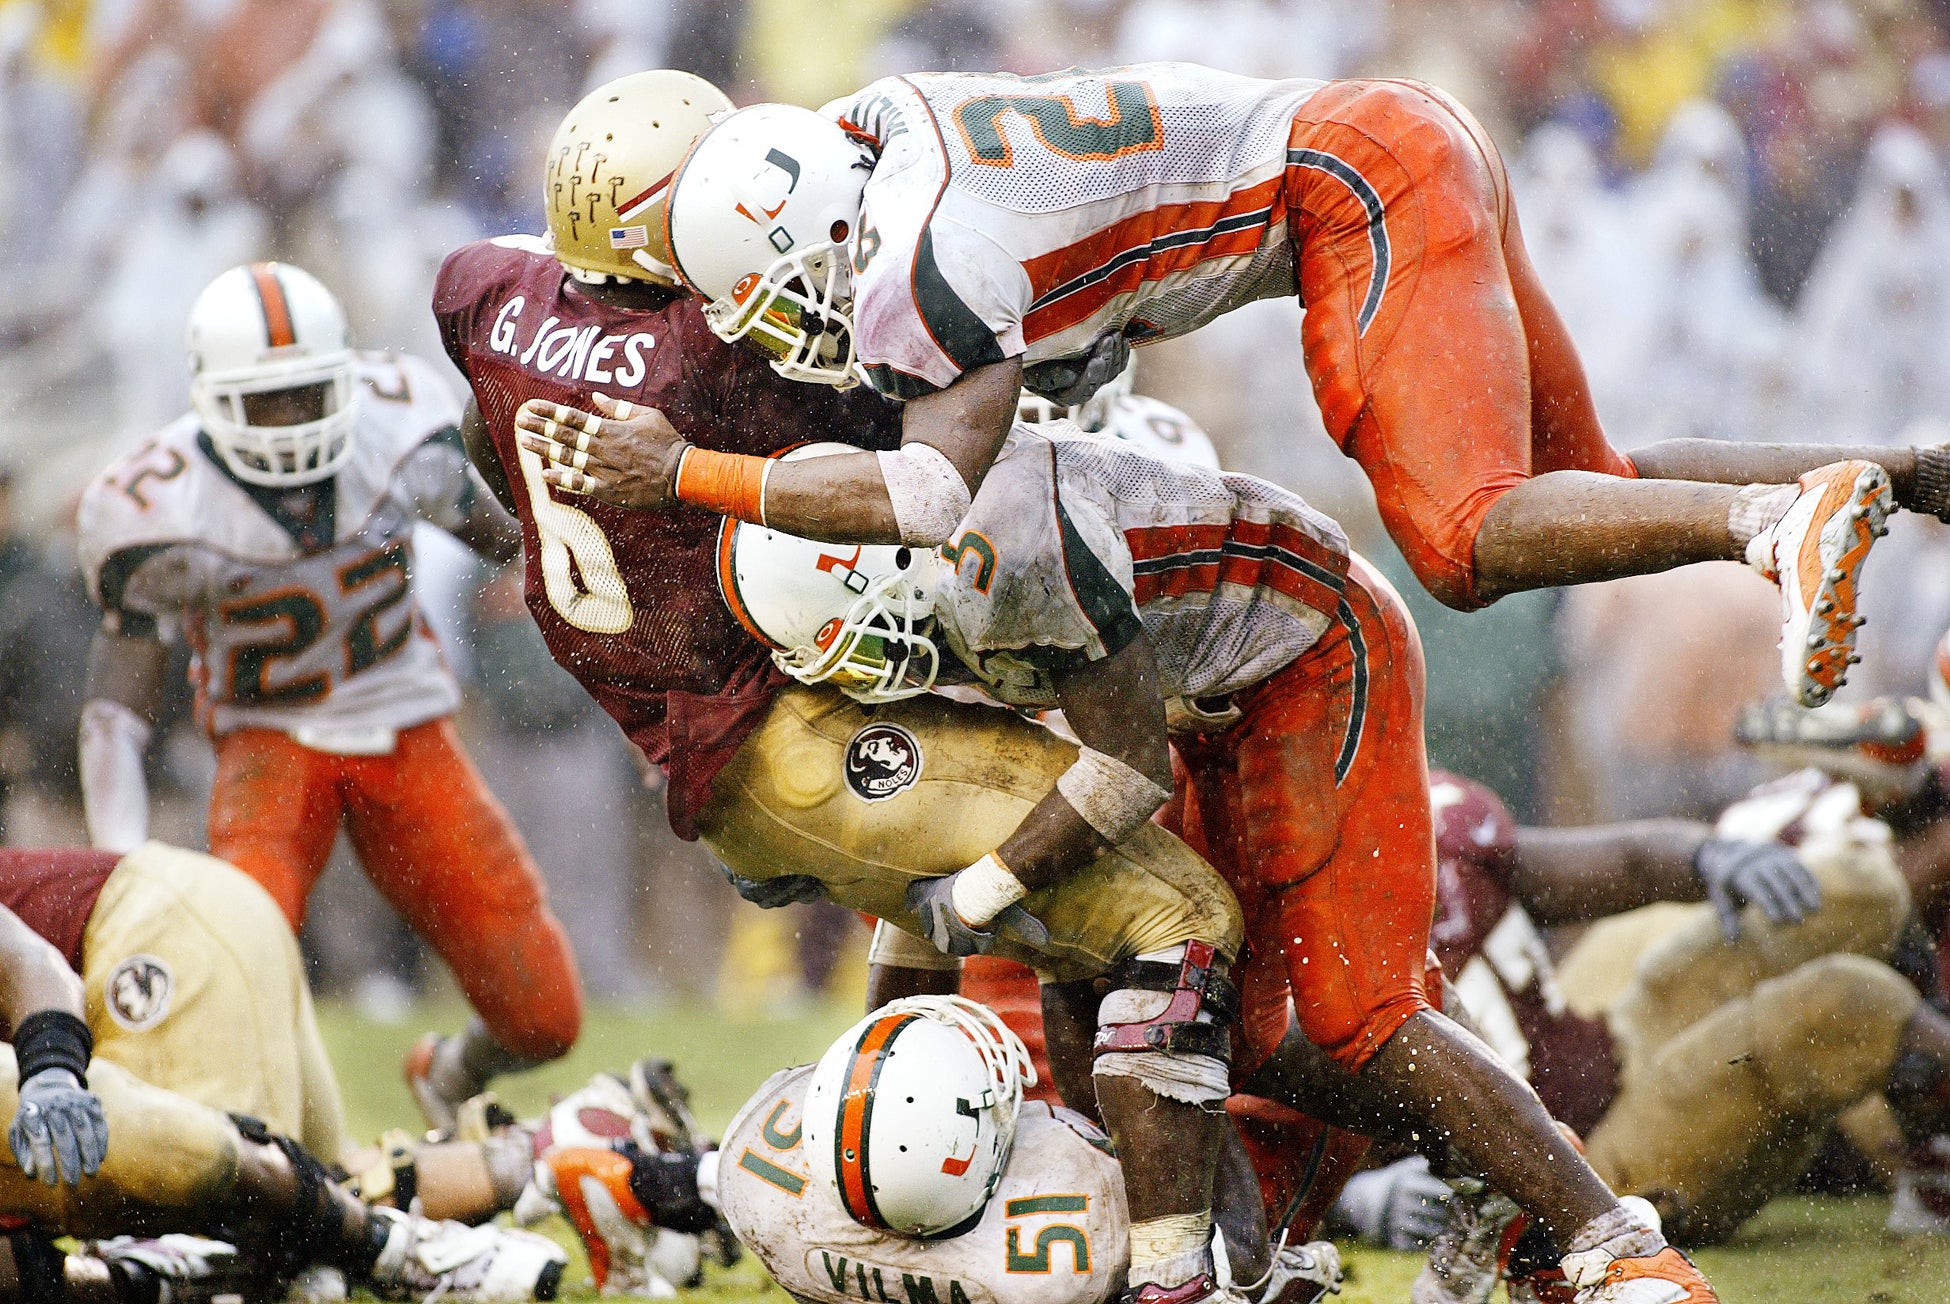 Sports Illustrated- When the Canes Ruled the Draft: The Year Miami Had Six First-Rounders